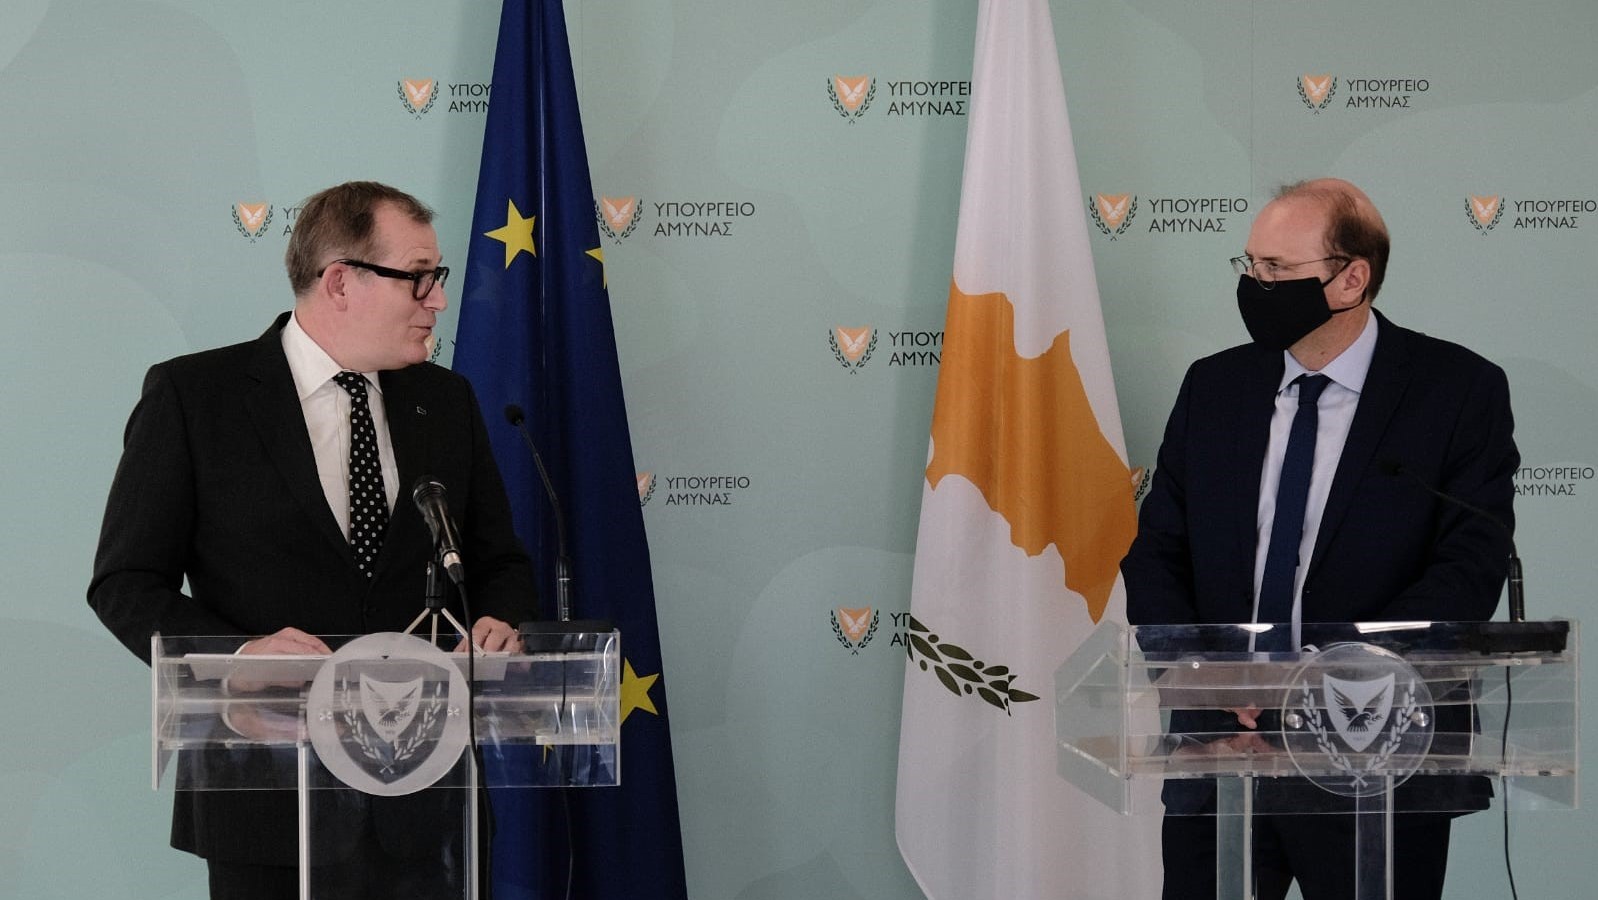 CE in Cyprus for high-level talks 